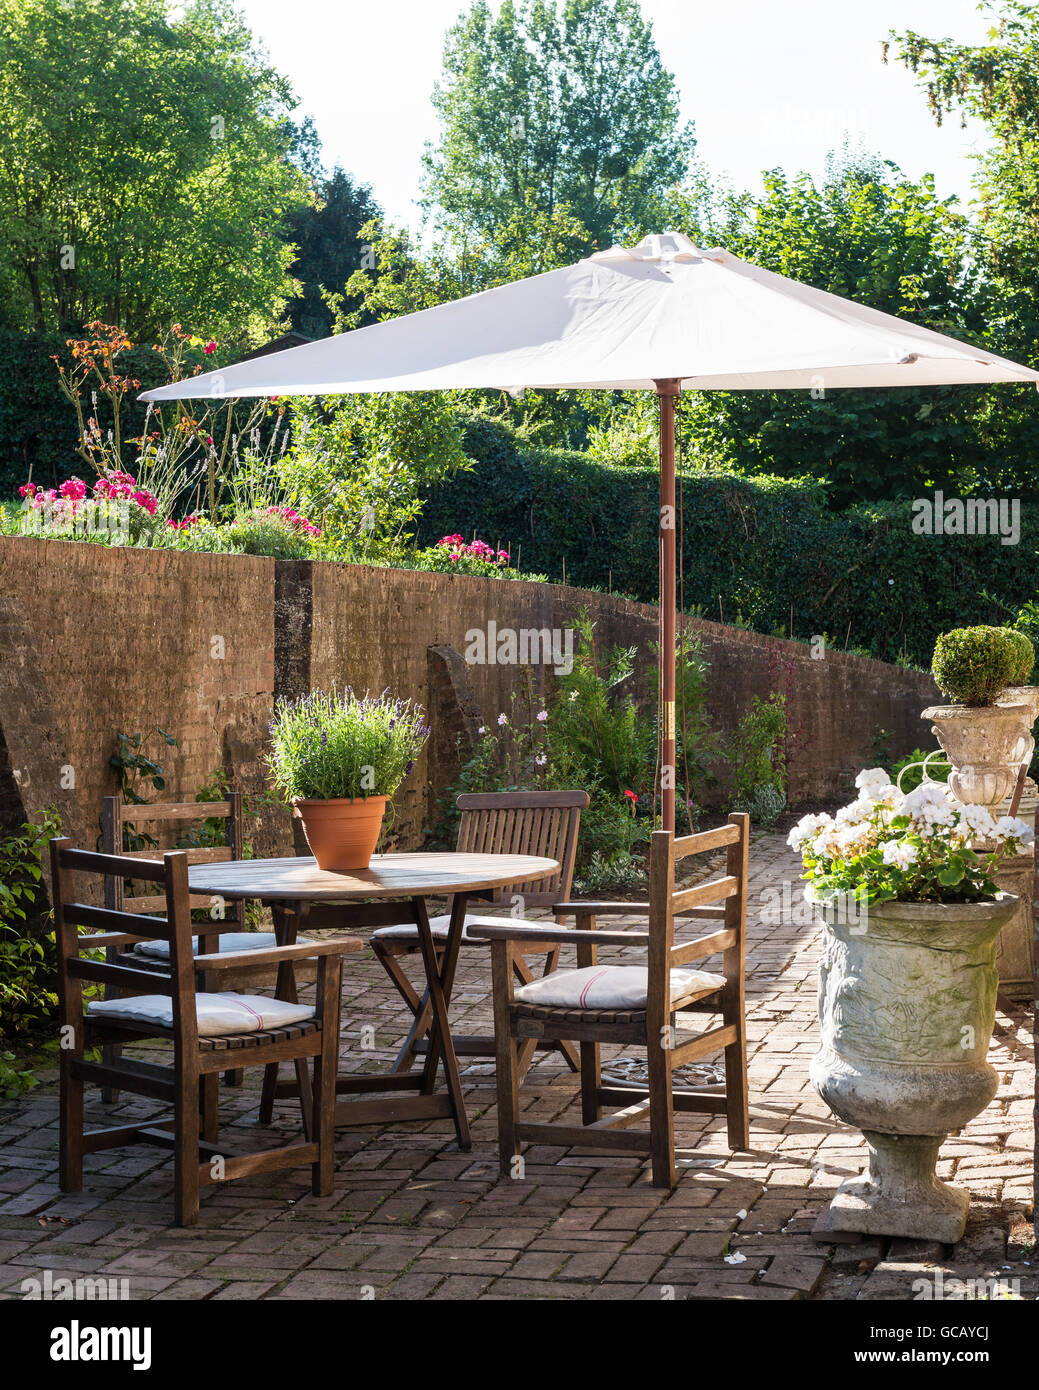 Teak furniture and stone urns on sunny bricked terrace with parasol Stock Photo